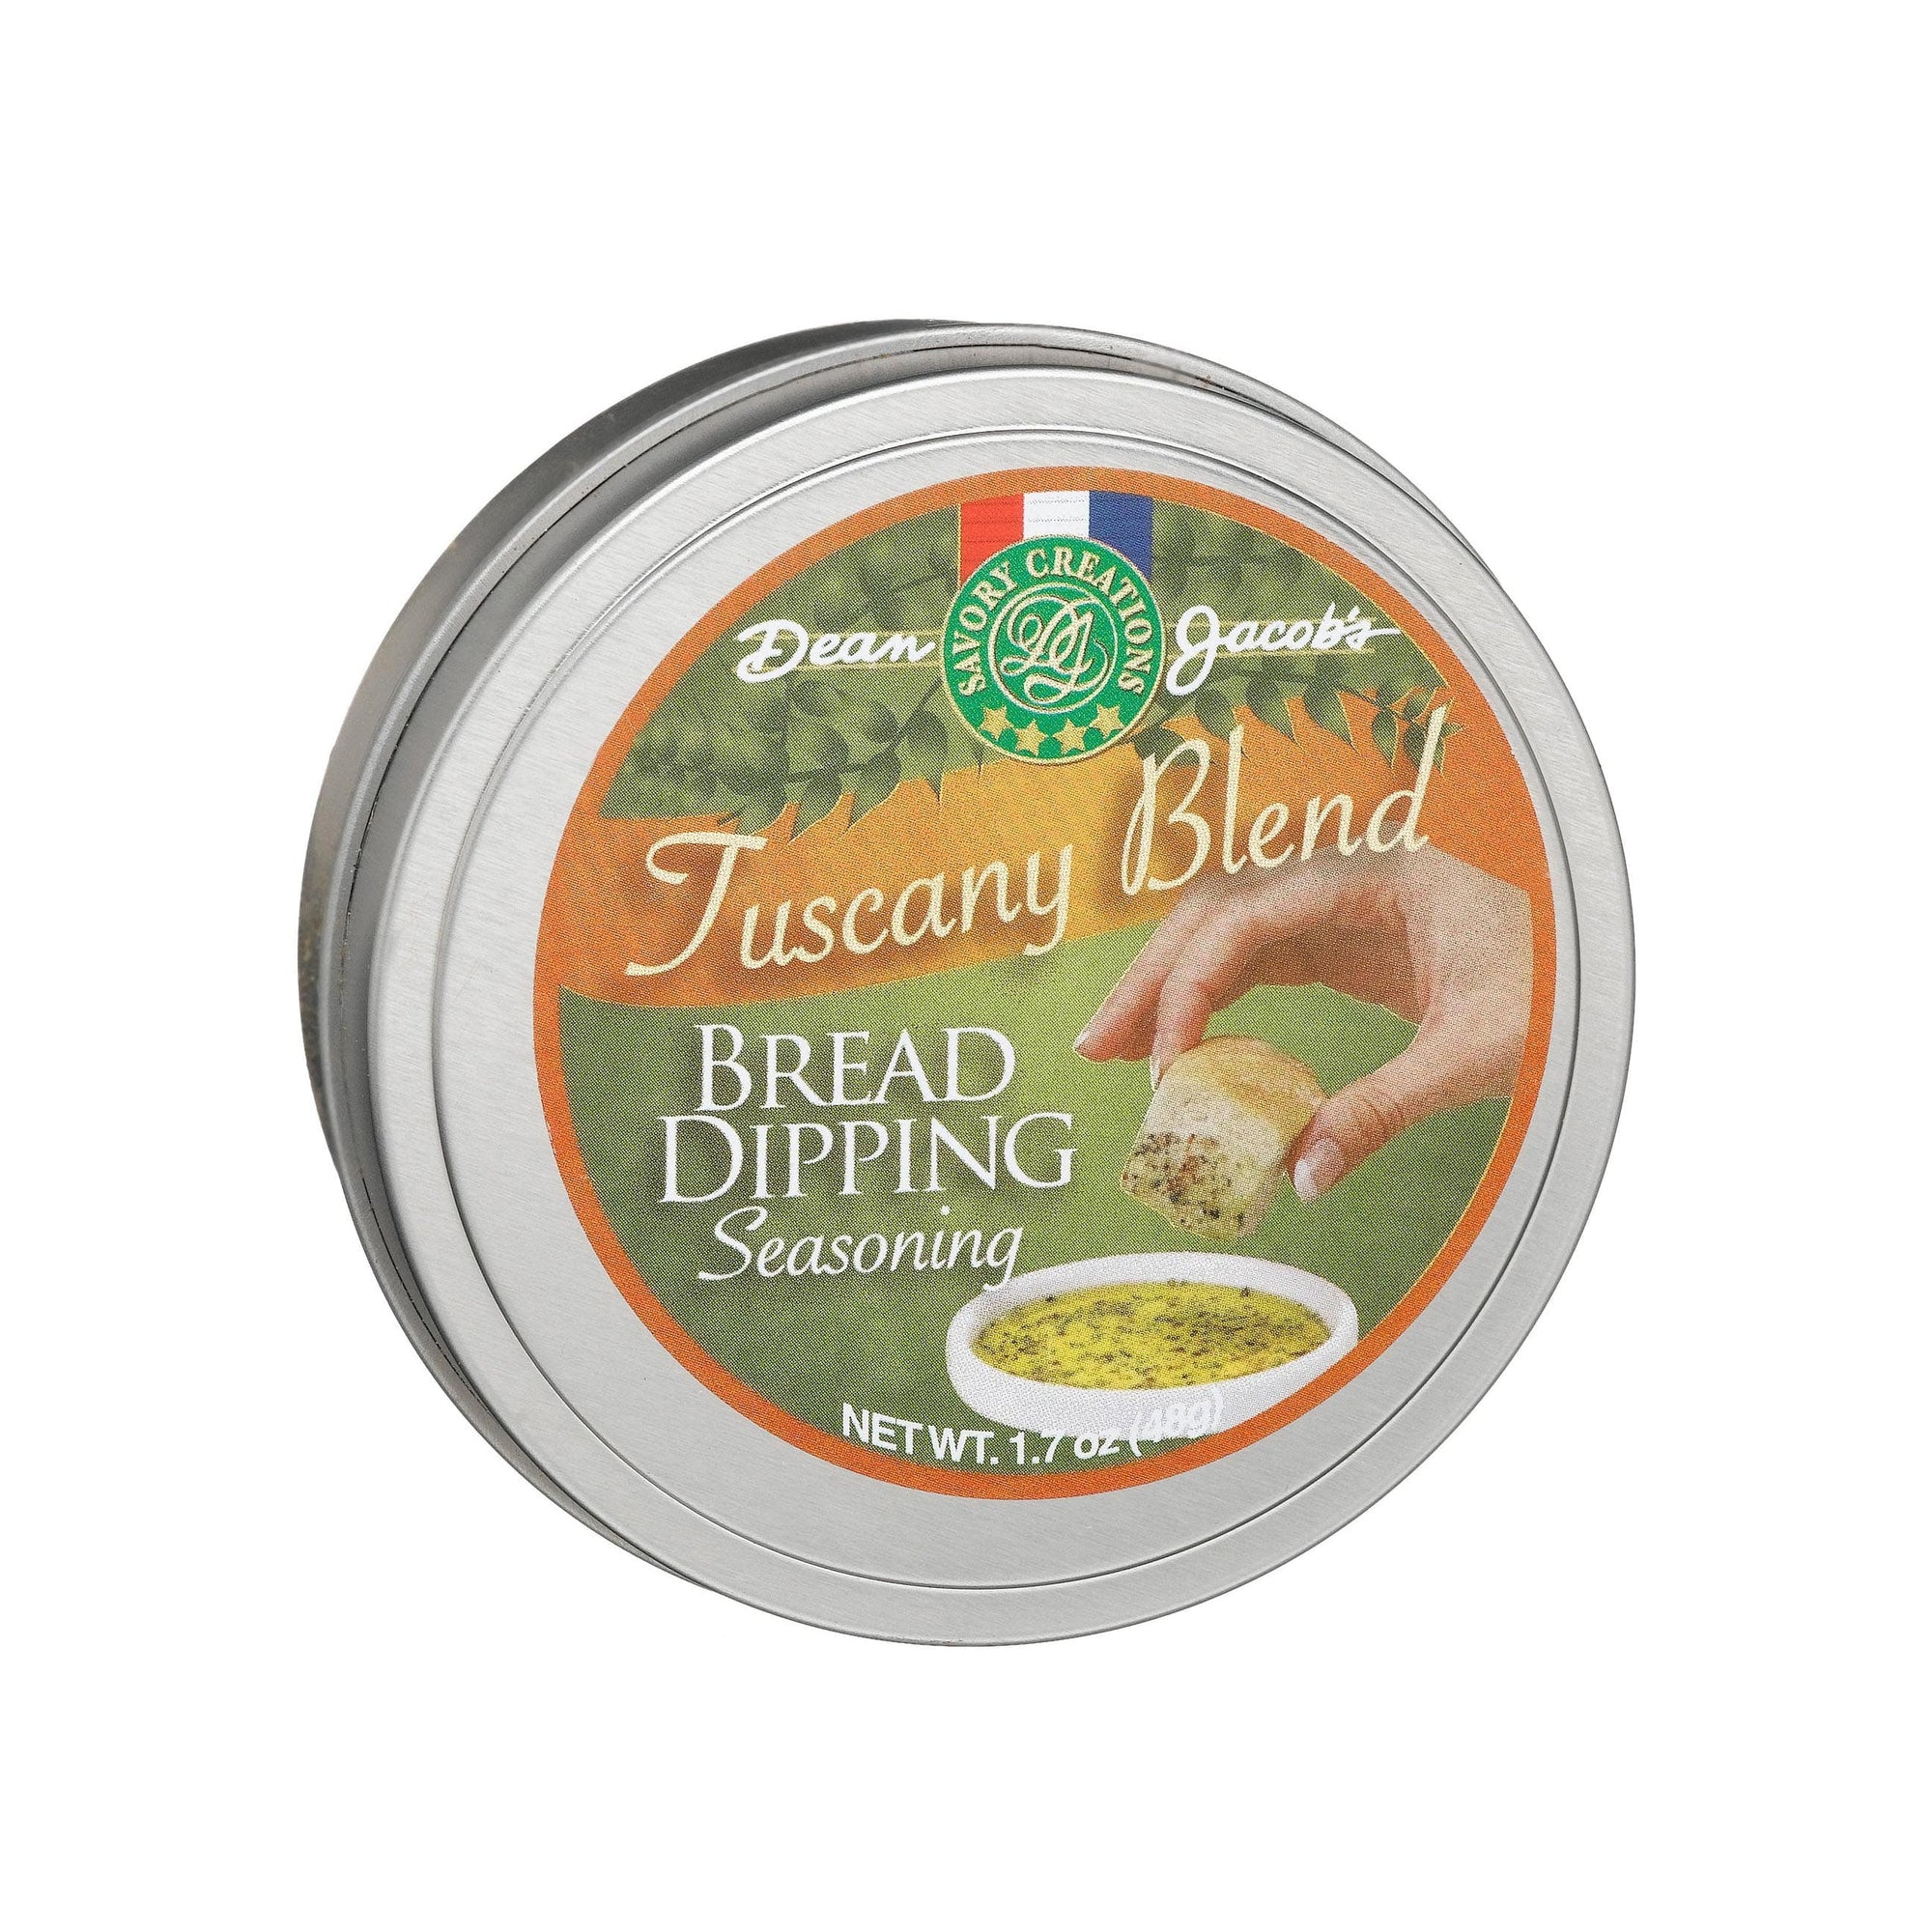 XCELL Dean Jacob's Tuscany Bread Dipping Tin